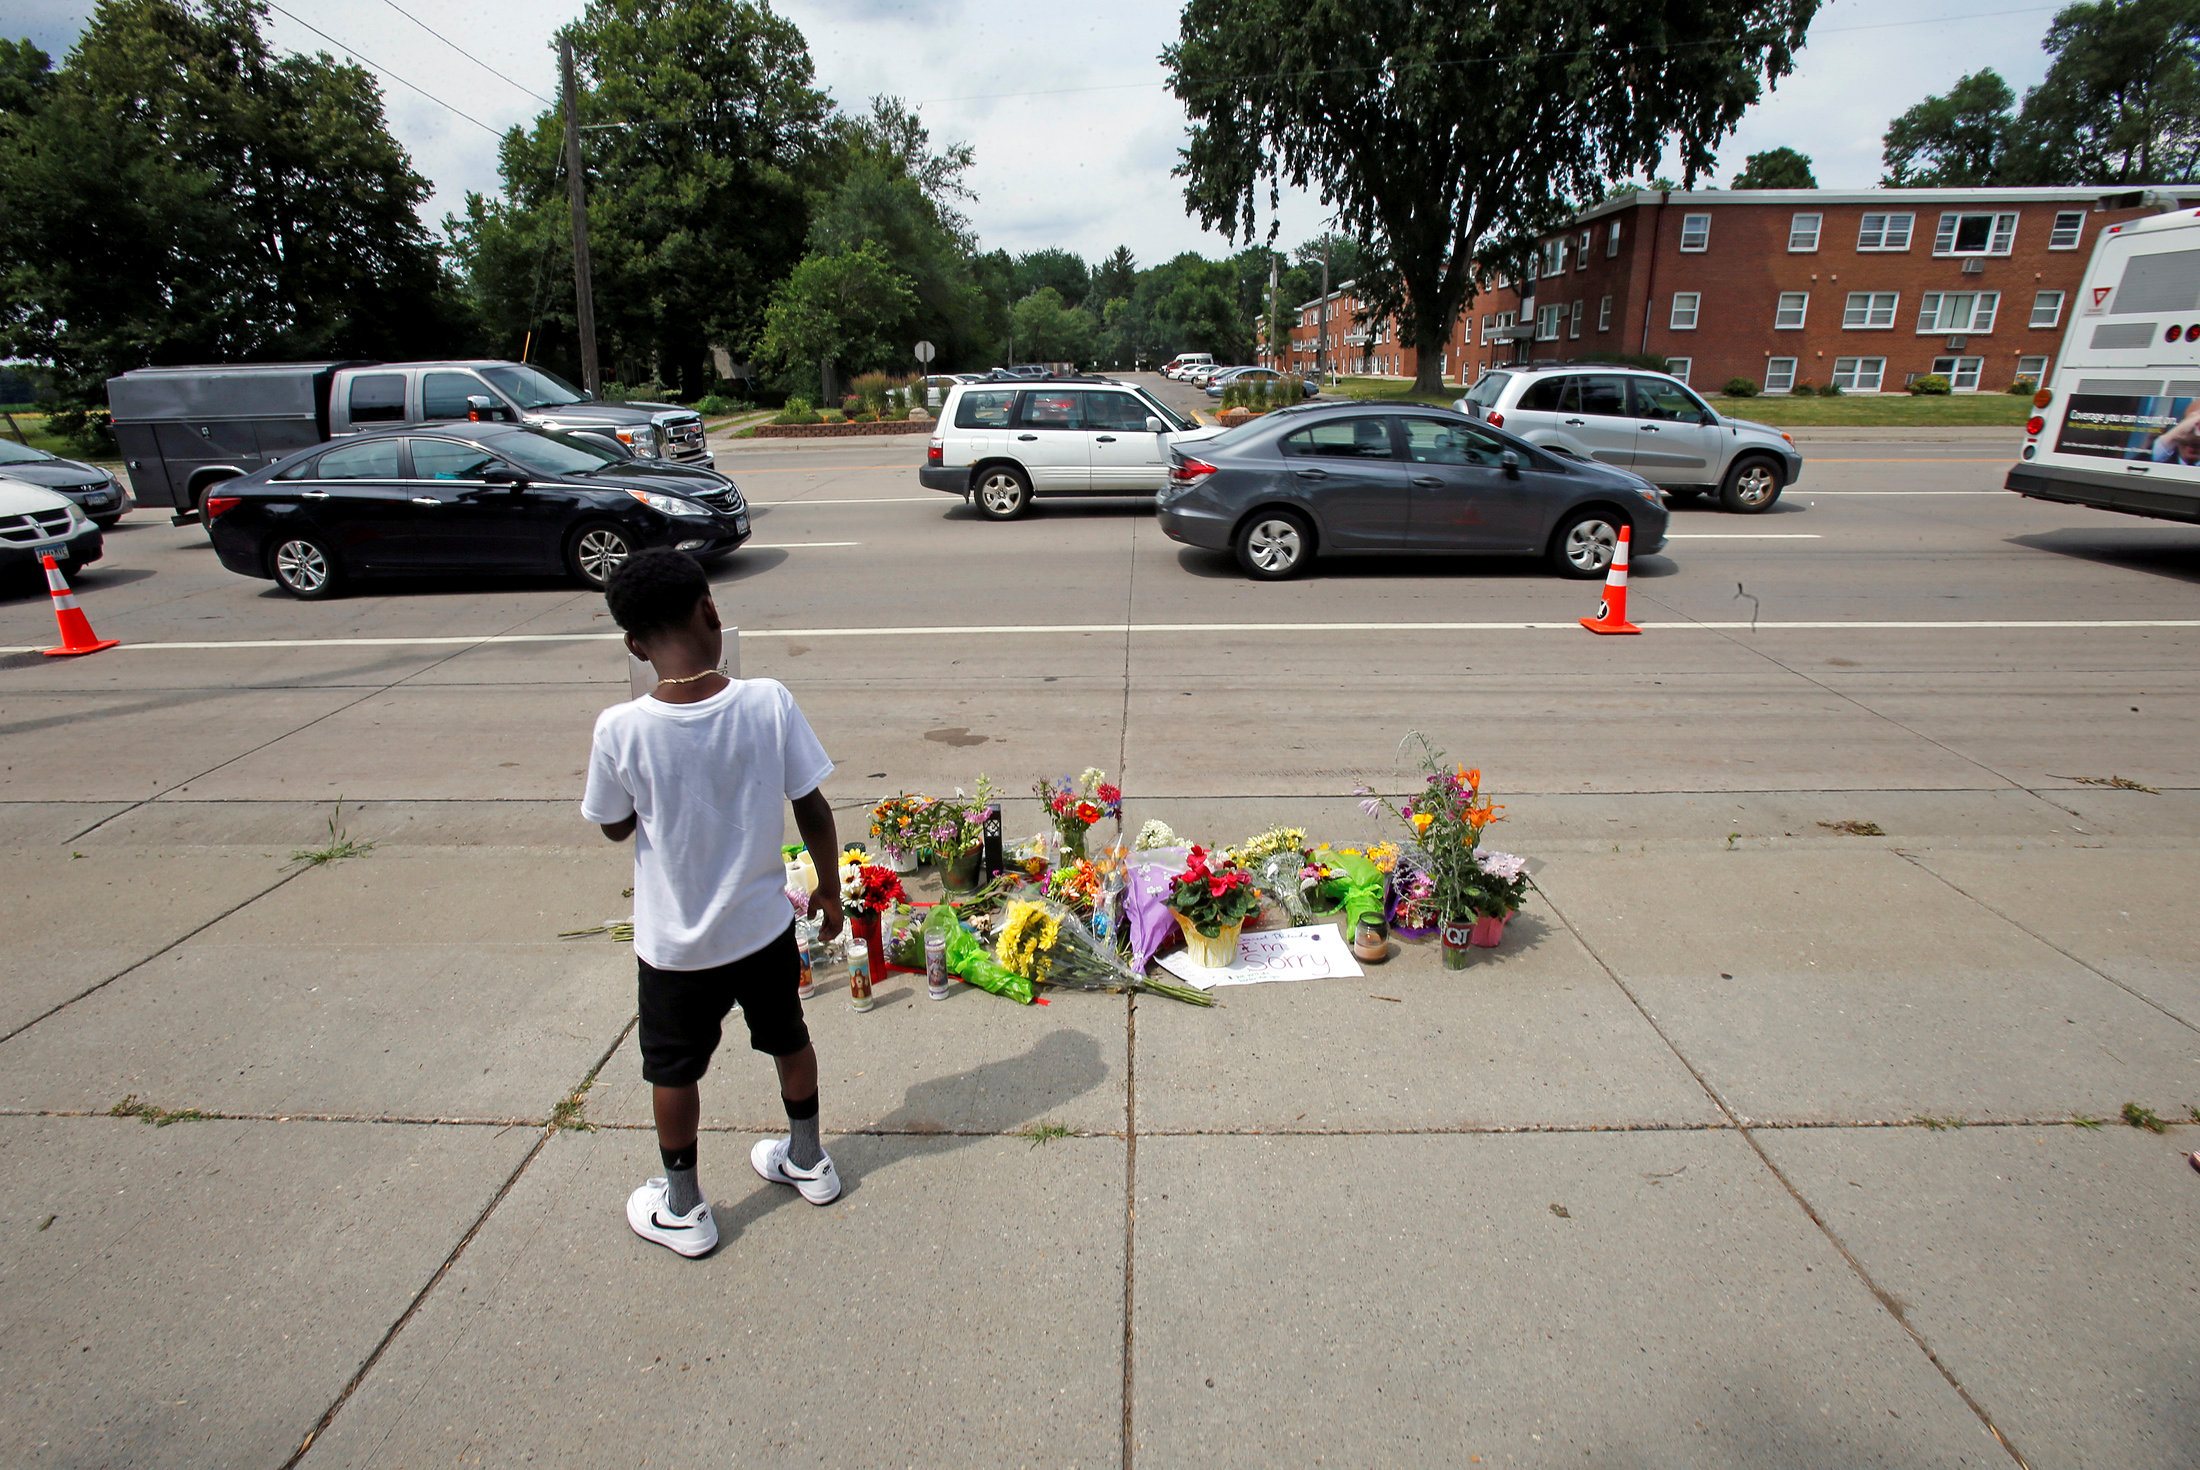 PHOTO: A boy stands at a make-shift memorial at the site of the police shooting of Philando Castile in Falcon Heights, Minnesota, July 7, 2016.